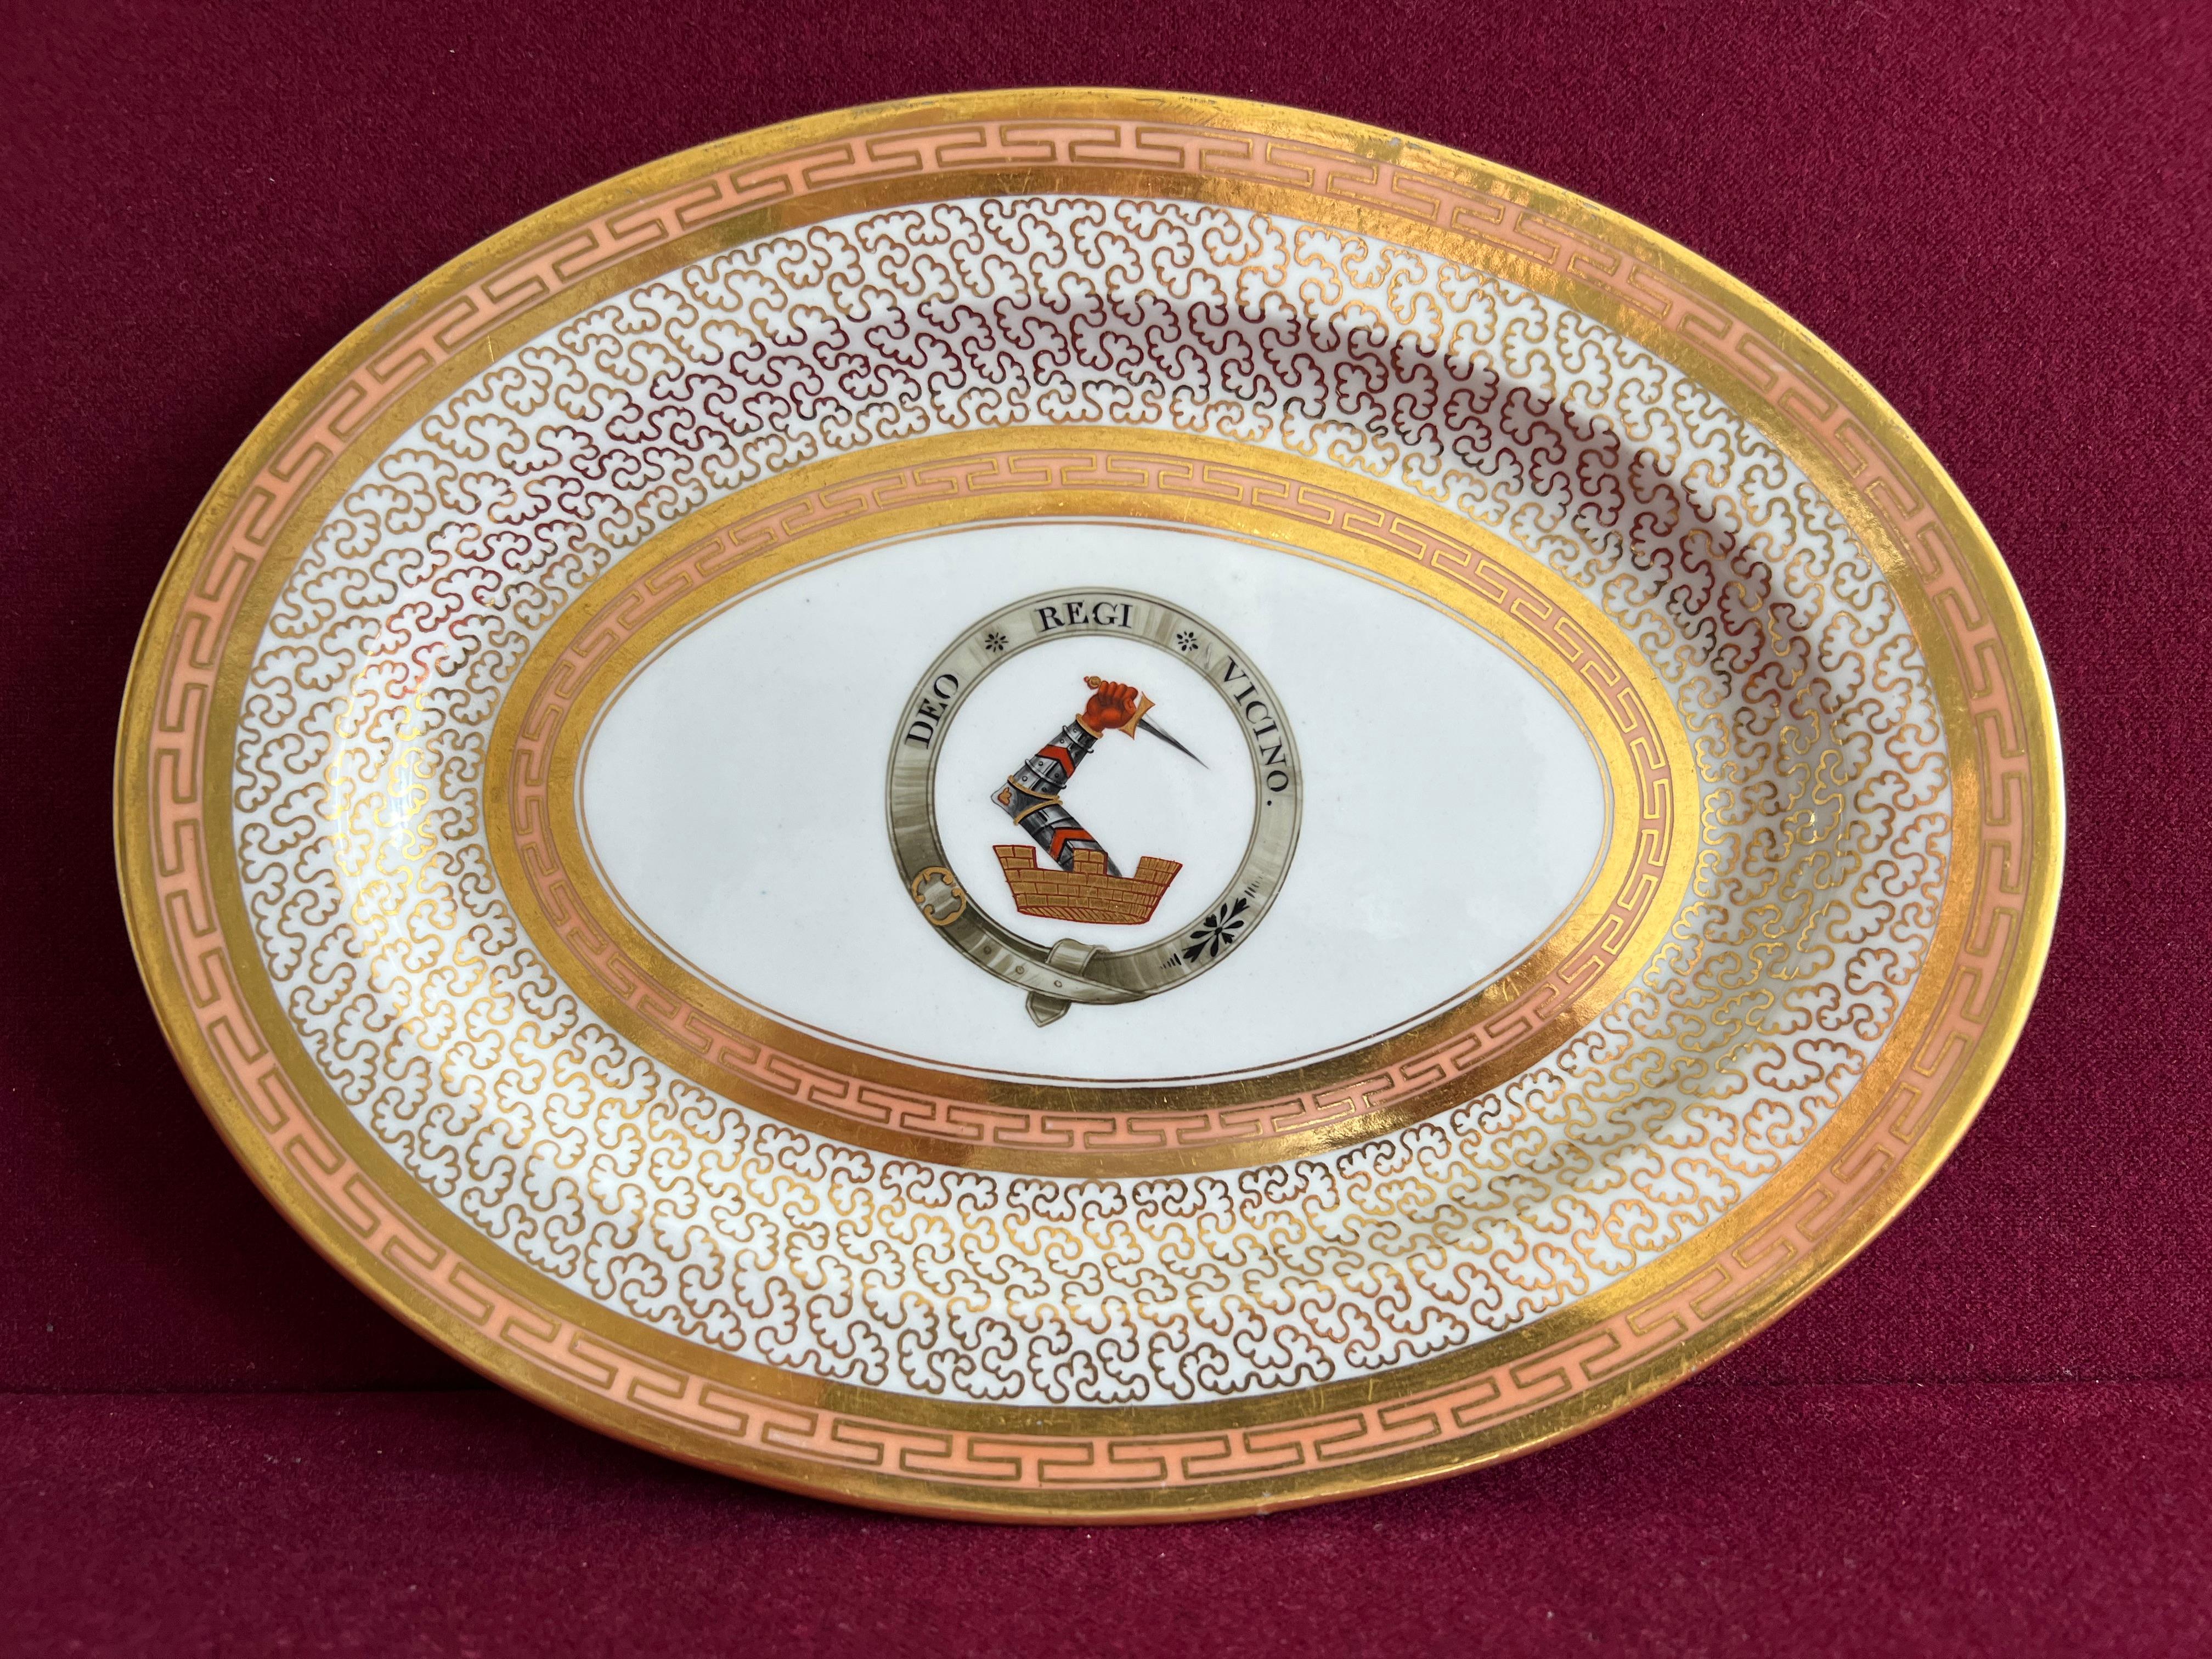 An exceptional Barr Flight Barr Worcester porcelain platter c.1804-1813 made for the Cookesfamily of Bentley, Worcestershire, Hand Painted with their family crest and motto, DEO REGI VINCINO (To God, my King, my neighbour).  This oval platter is